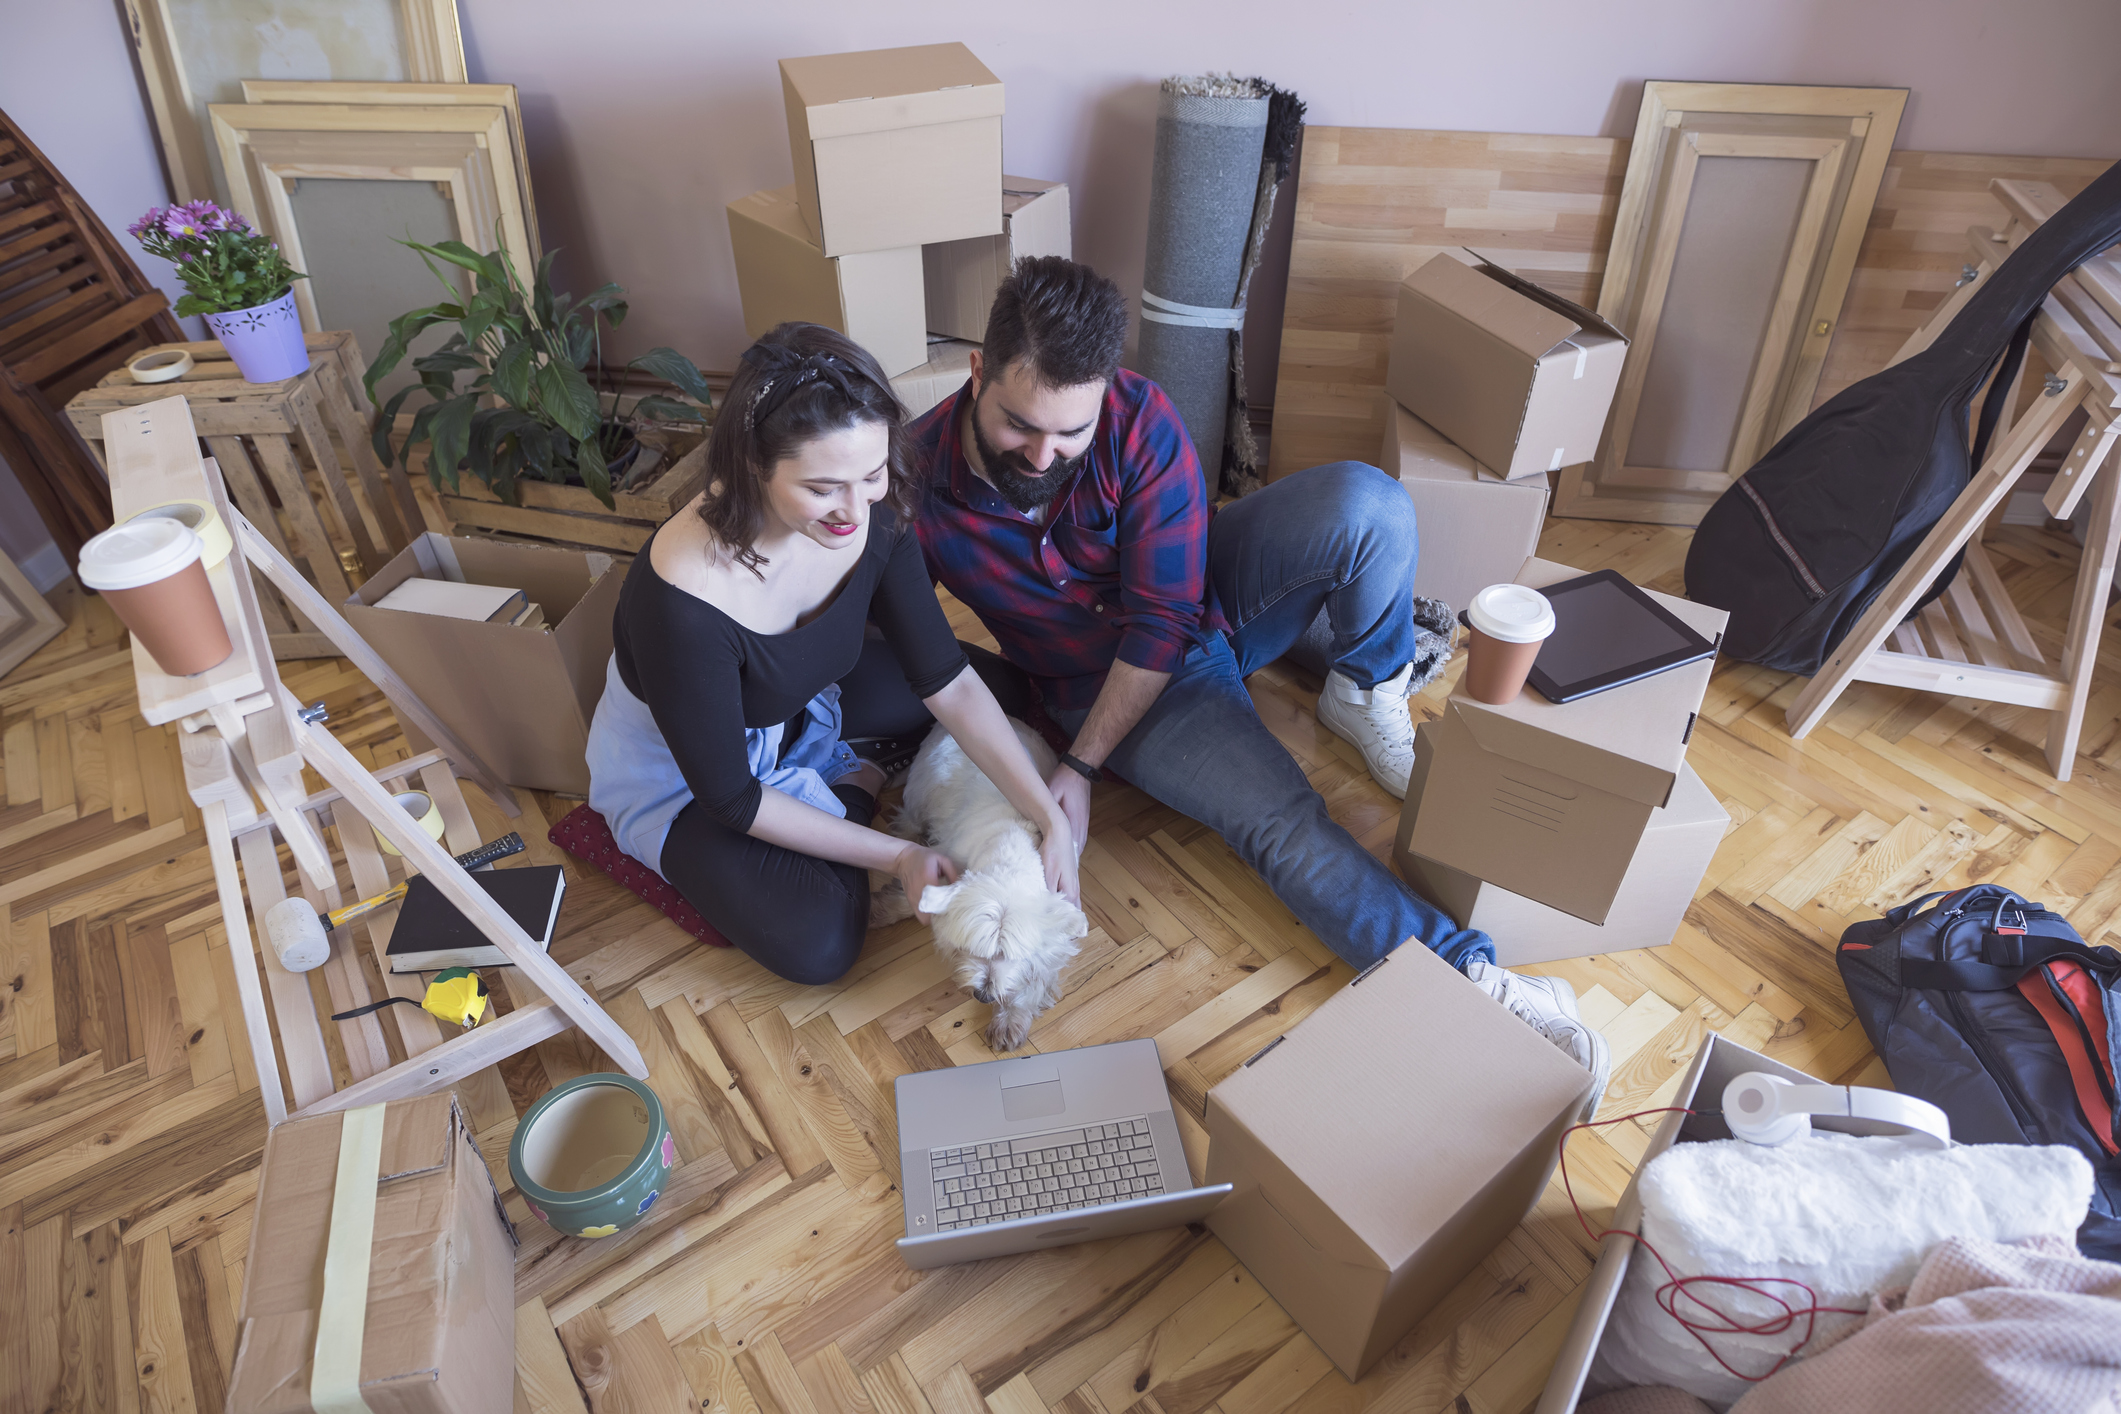 Moving Homes: 3 Common Mistakes and How to Avoid Them in Your Move